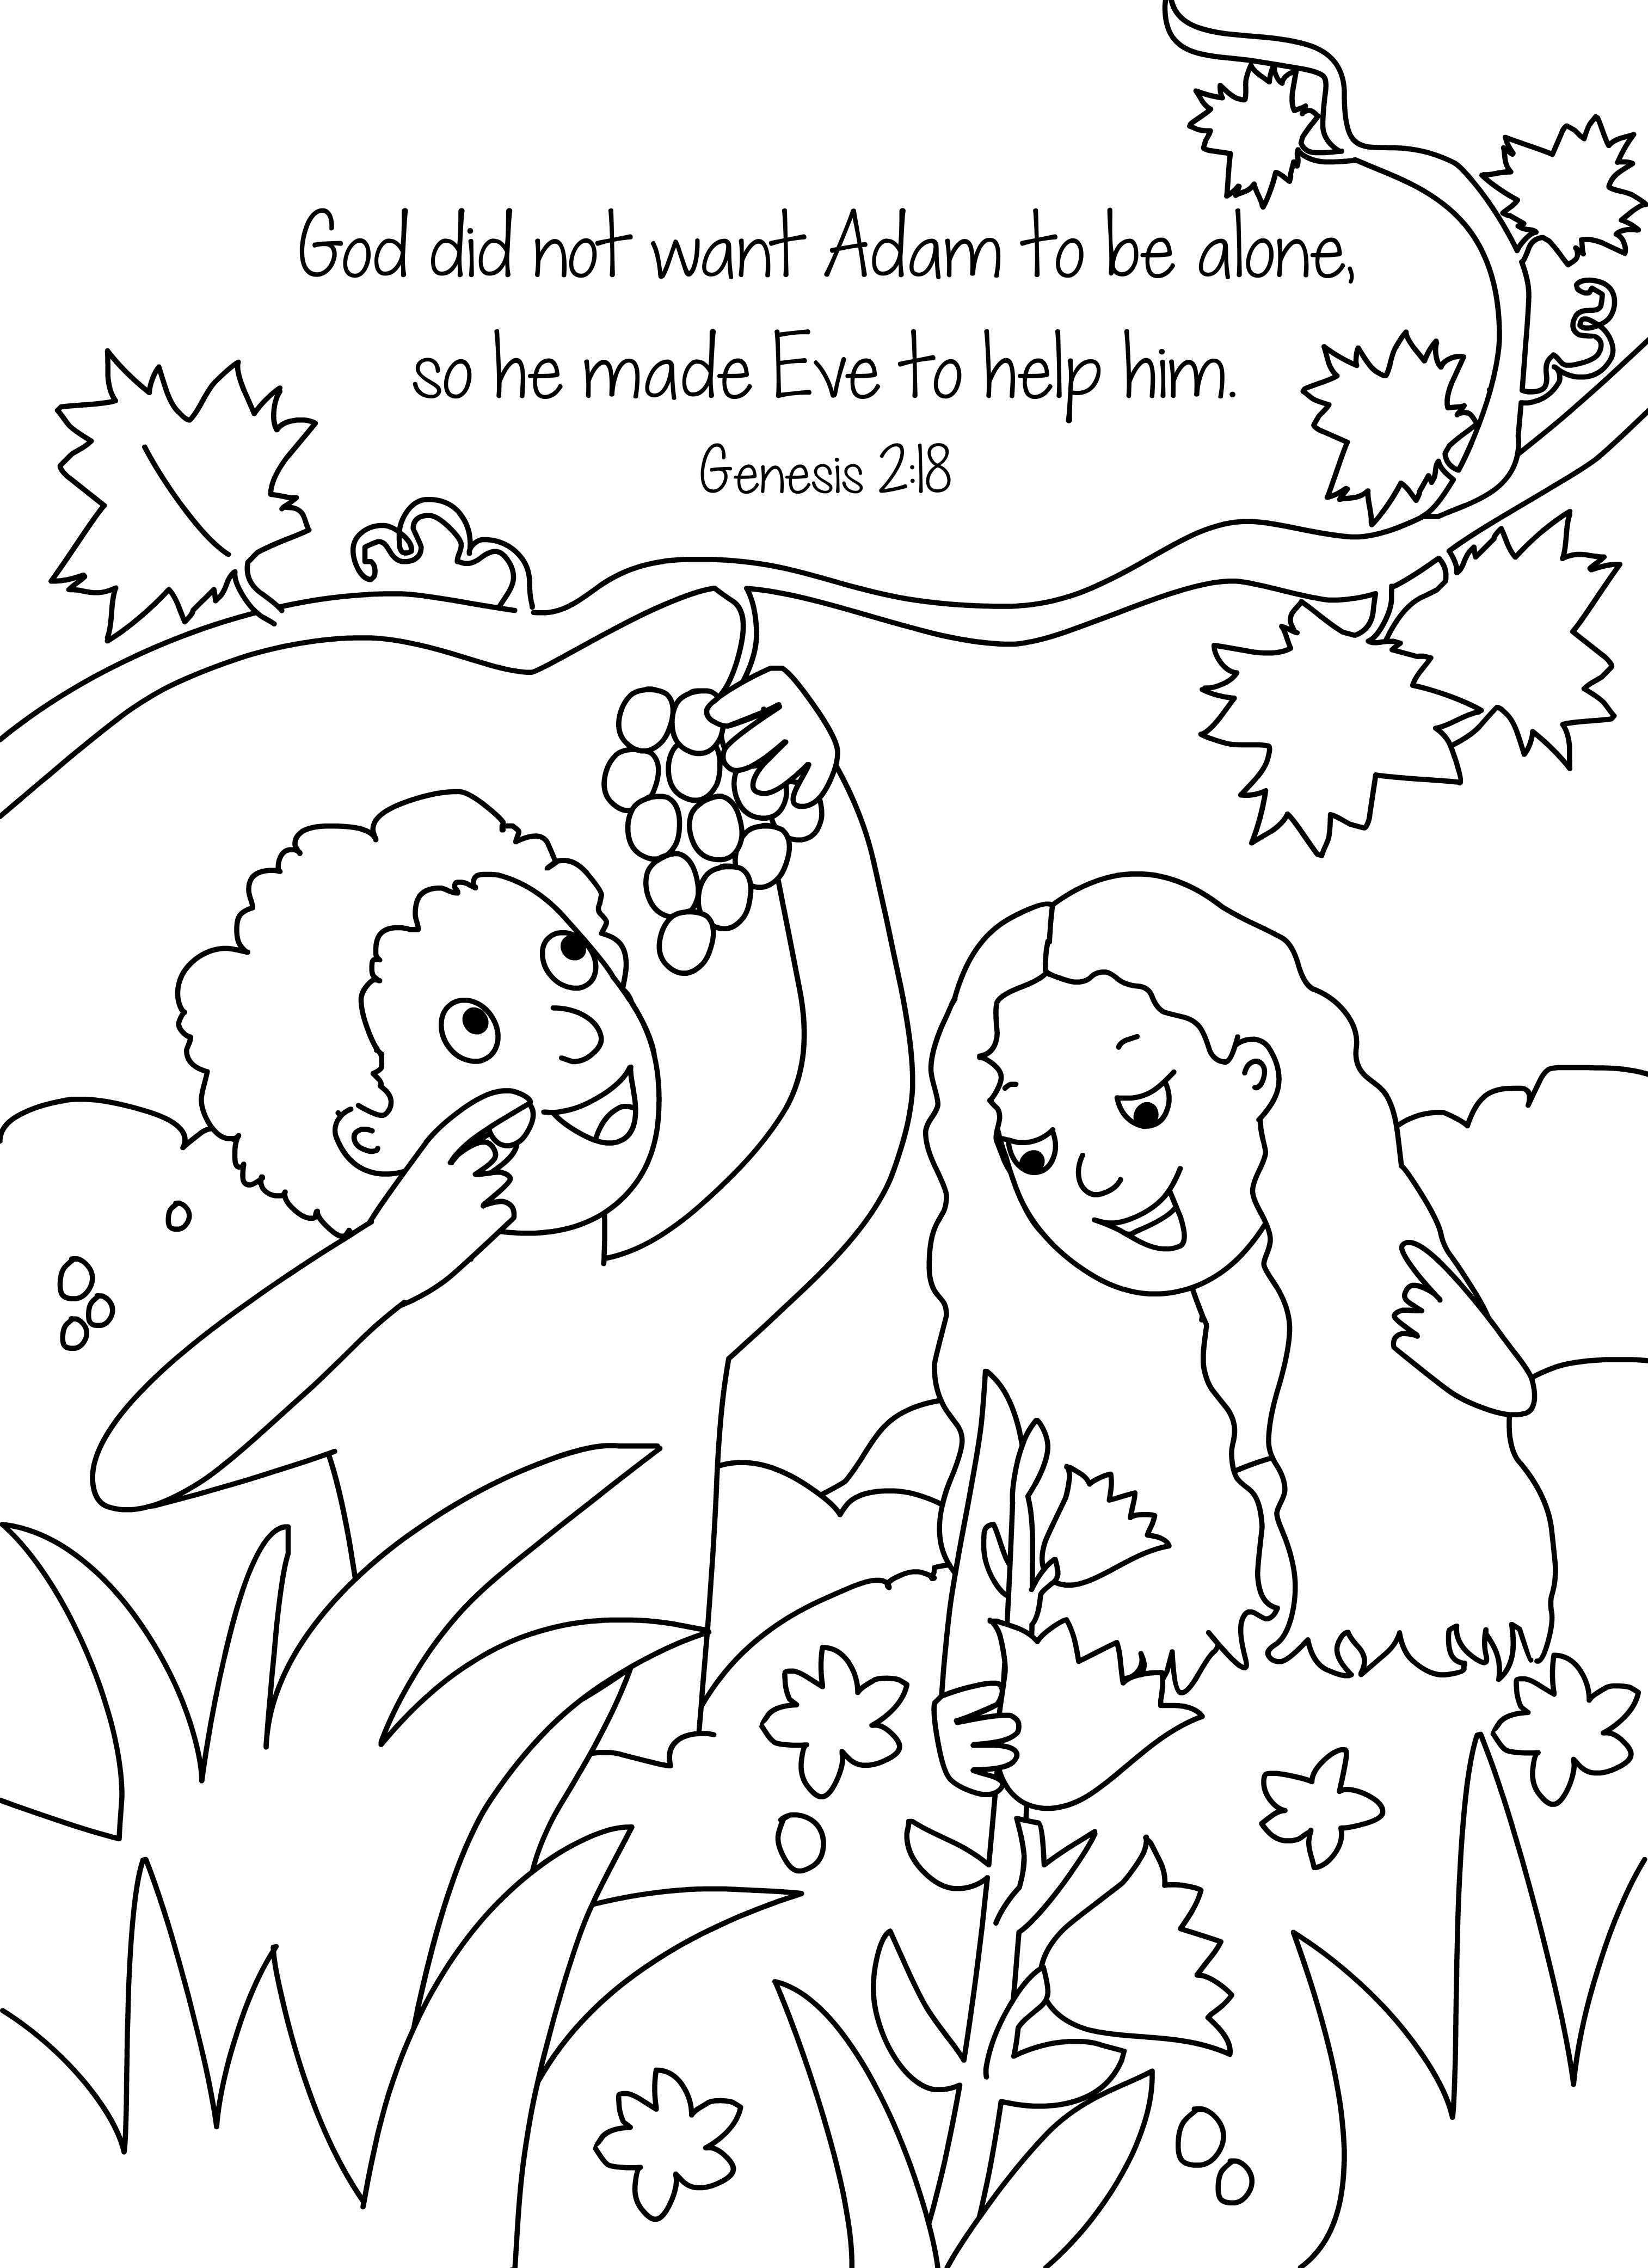 Bible Key Point Coloring Page | Adam and Eve | Free Children's Videos ...